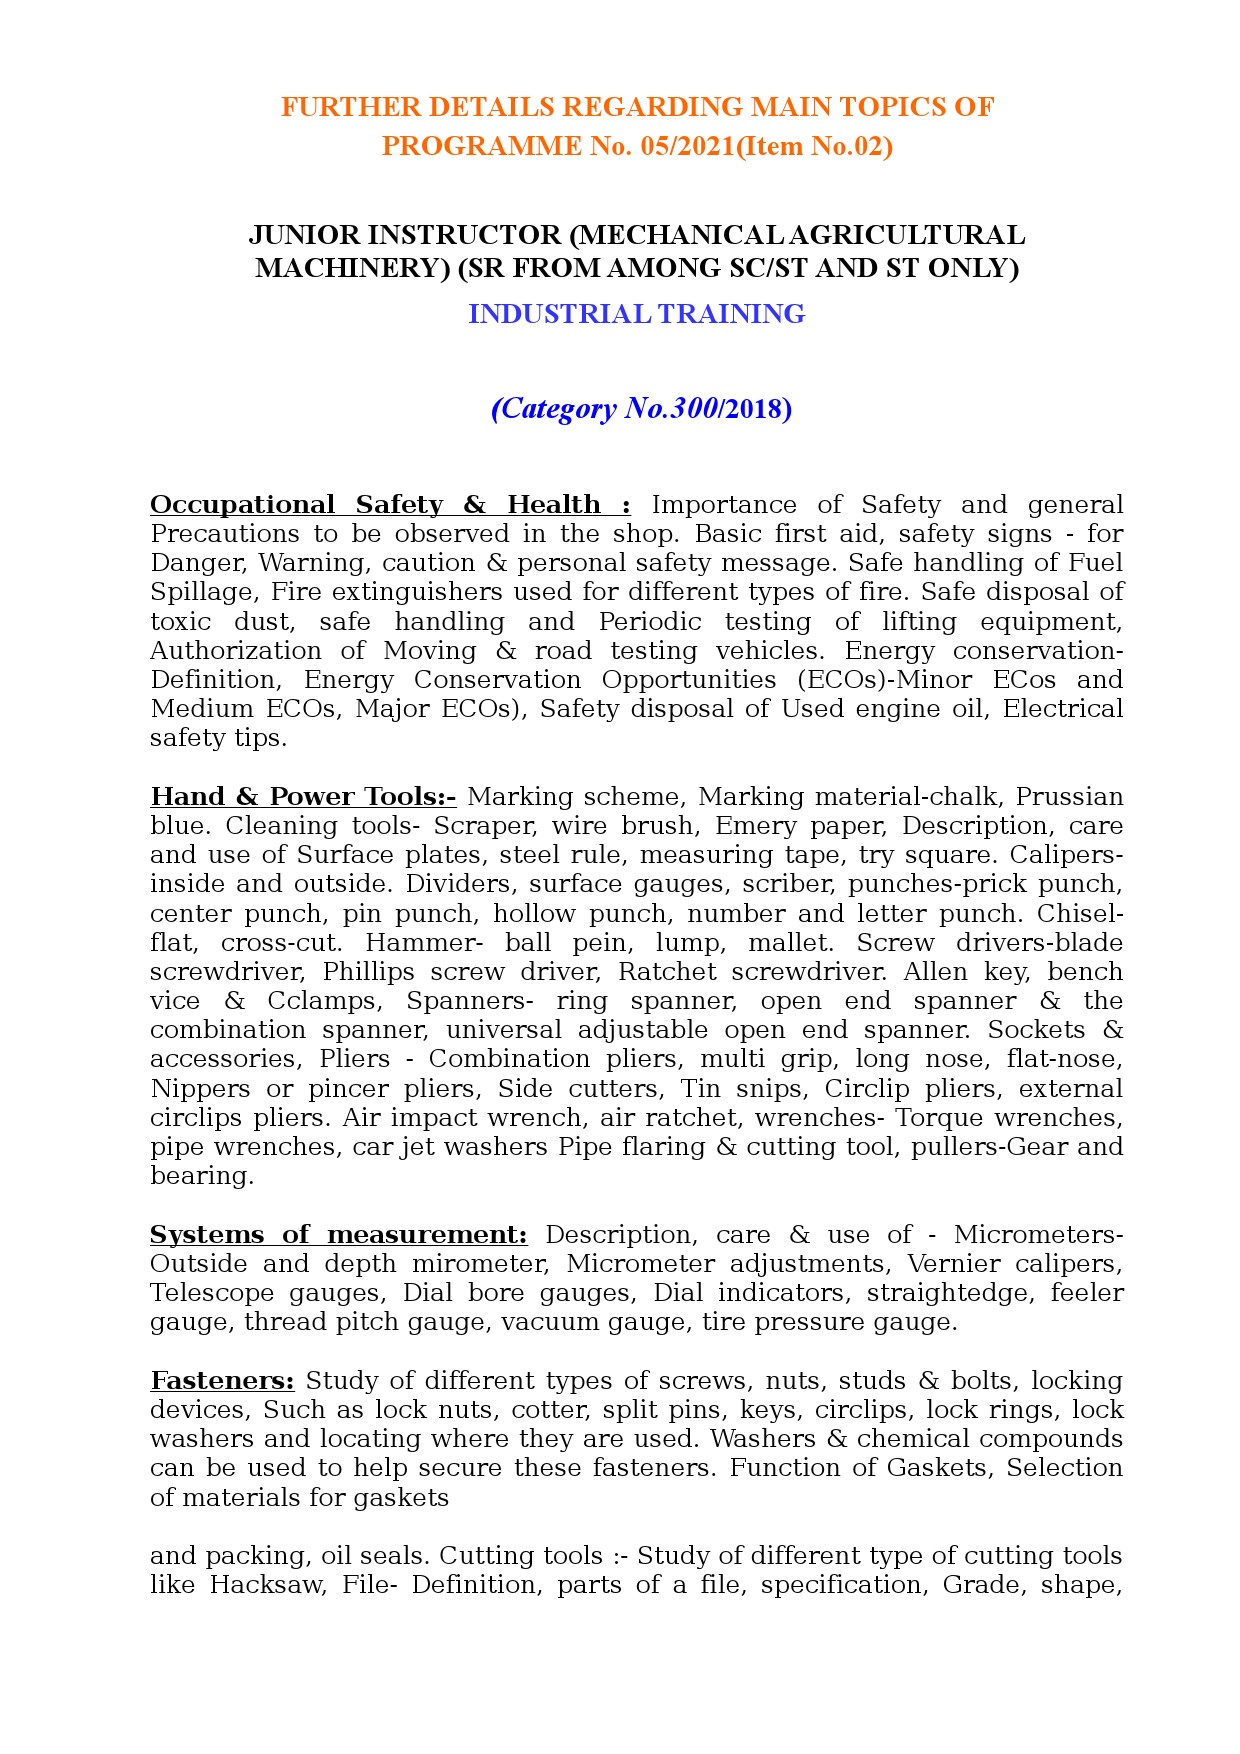 Junior Instructor Mechanical Agricultural Machinery KPSC Exam Syllabus May 2021 - Notification Image 1